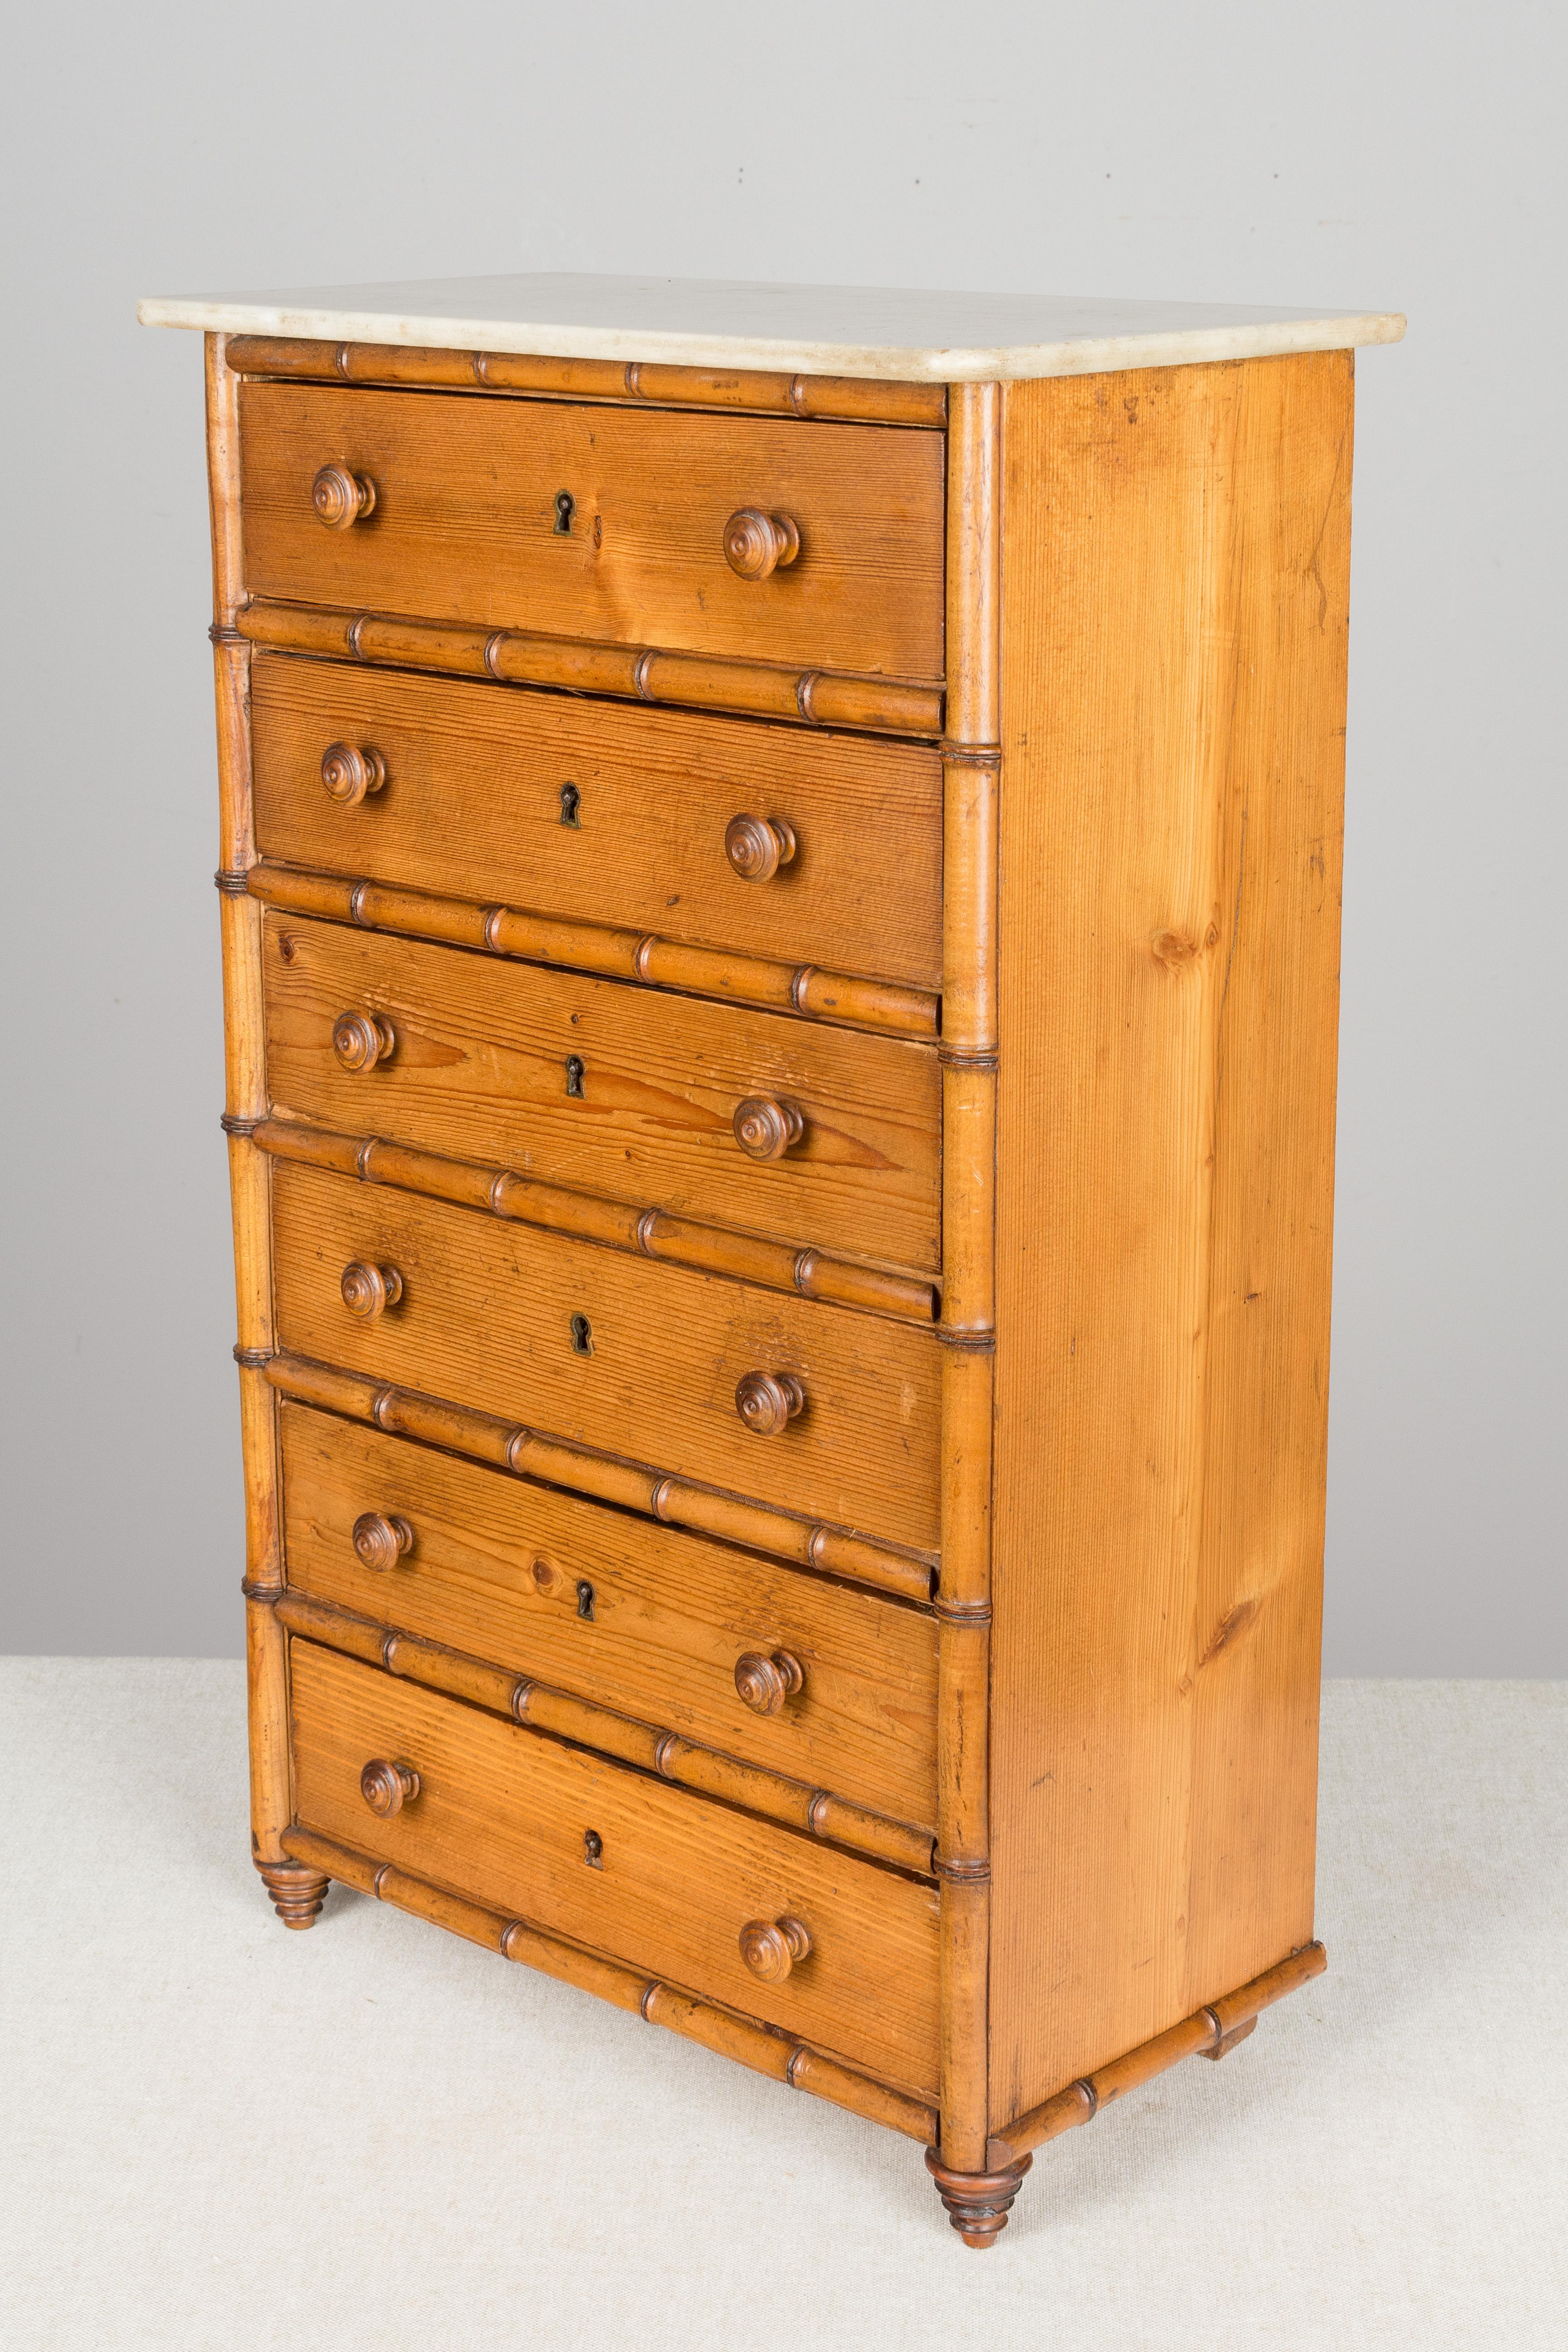 A 19th century French faux bamboo miniature chest of drawers, or chiffonier, made of solid cherry and pine with white marble top. Six drawers with turned wood knobs and locks, but no key. Some of the locks are missing. All original. Perfect for